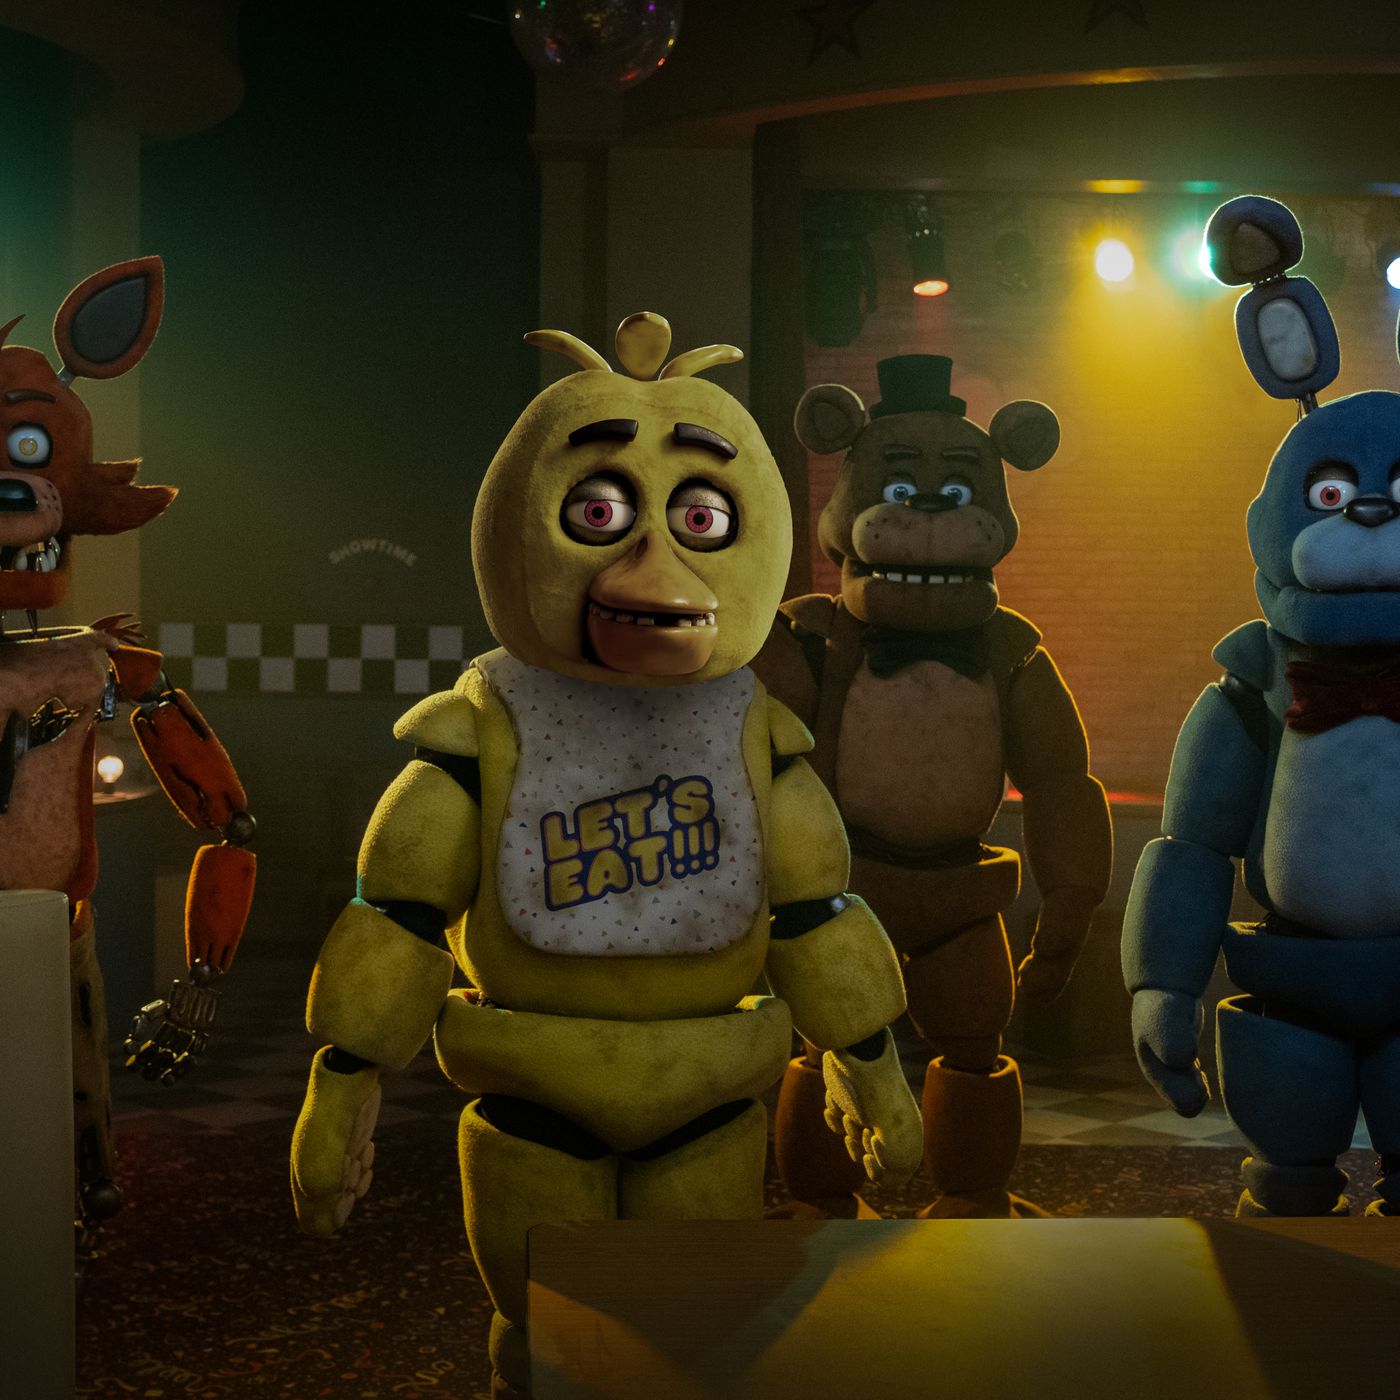 where does fnaf take place